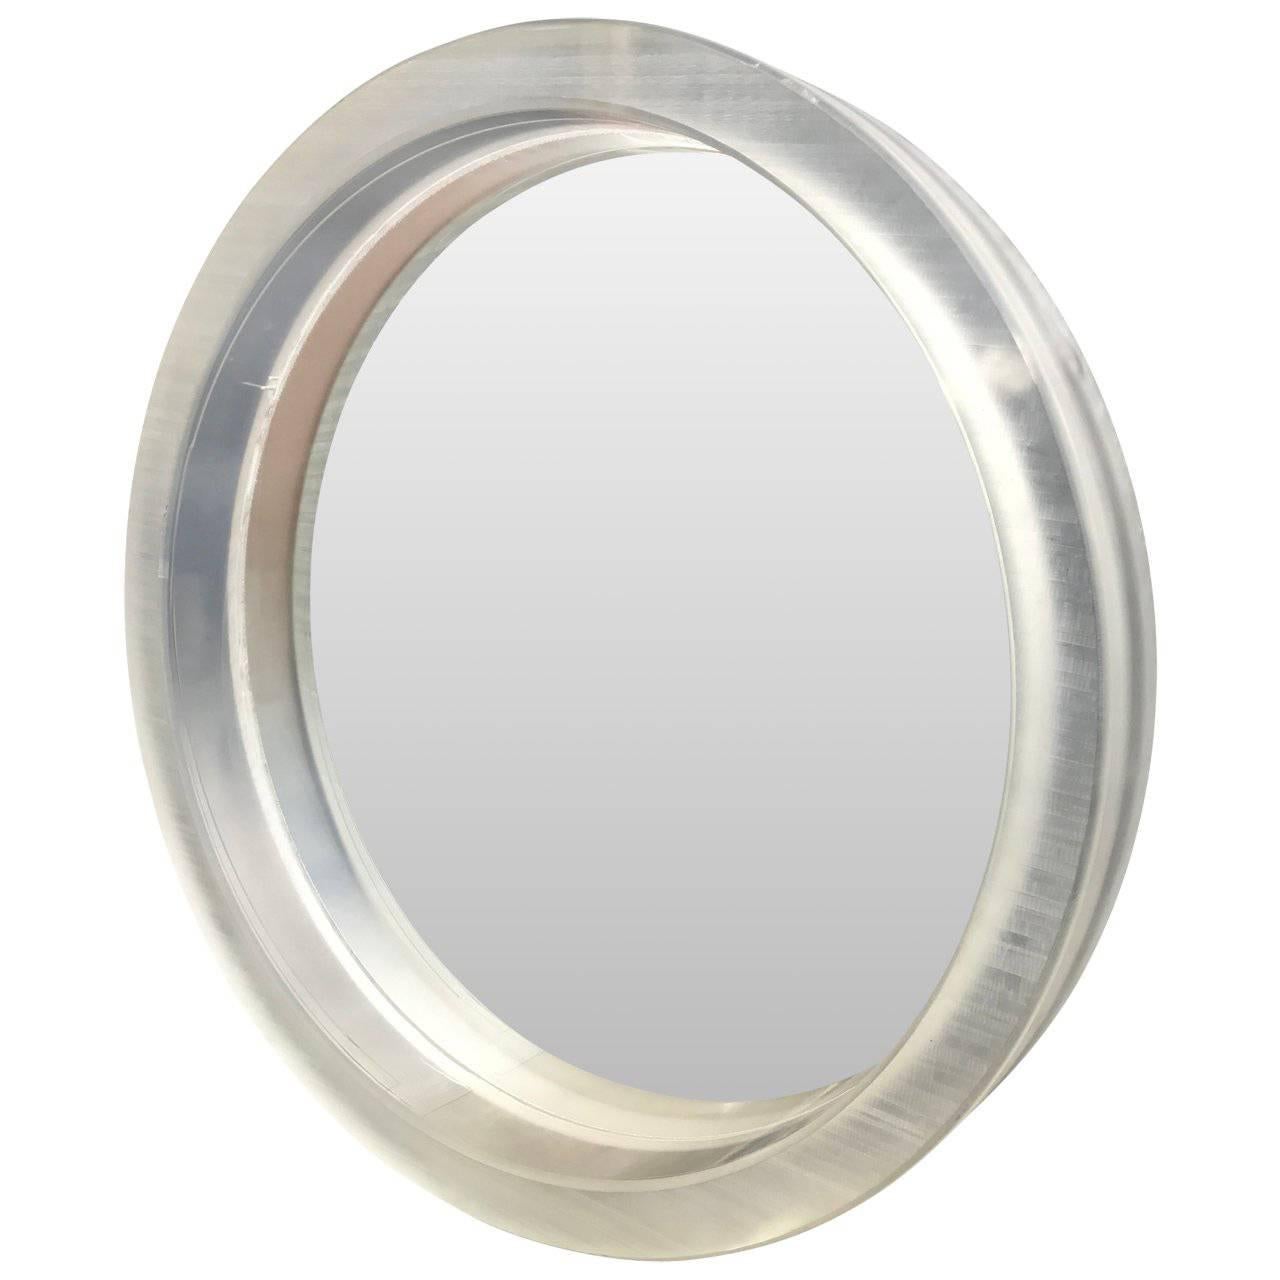 Large round Mid-Century Modern thick Lucite wall mirror

A single thick framed rough cut acrylic or Lucite mirror. The surface on the mirror is rough and individual, due their handcrafted cut. The mirror can be lit from behind in white or a